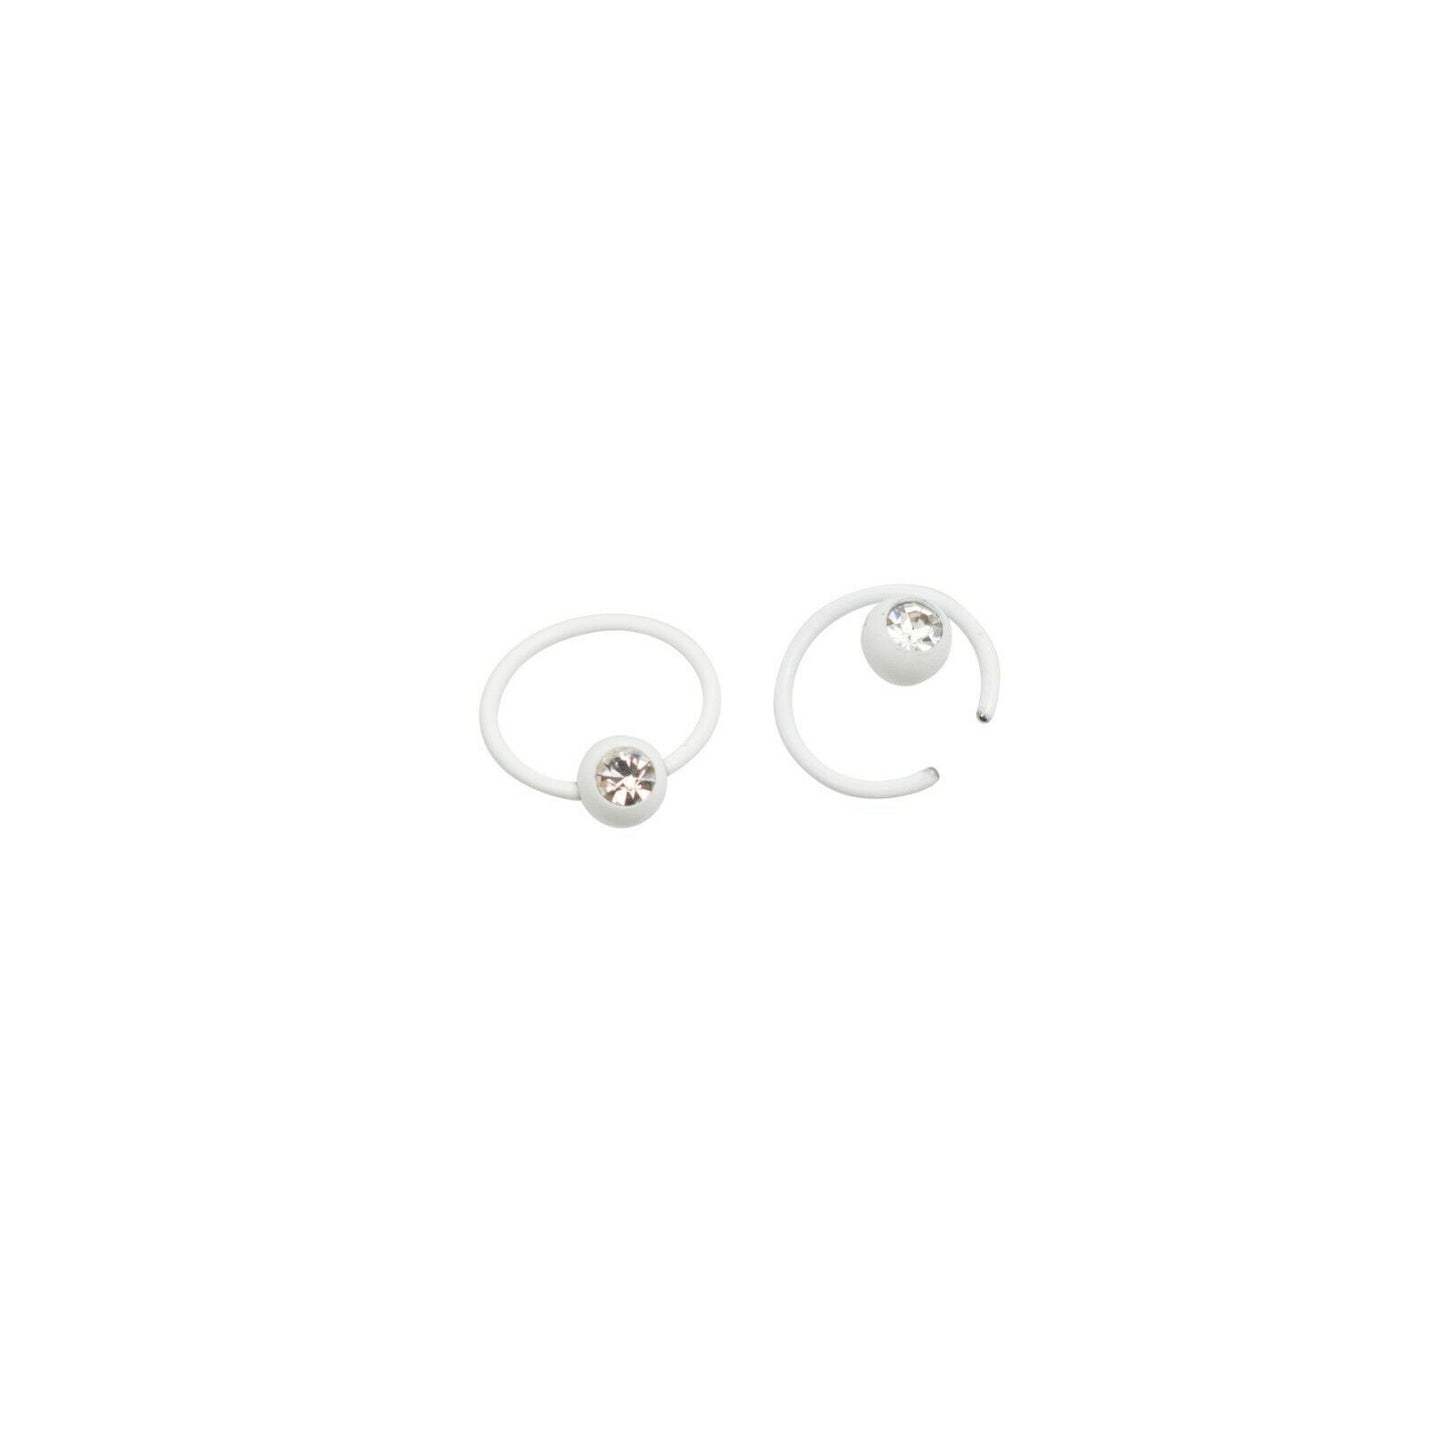 Nipple White Captive Bead Rings with Cubic Zirconia Sold as a Pair 16 Gauge